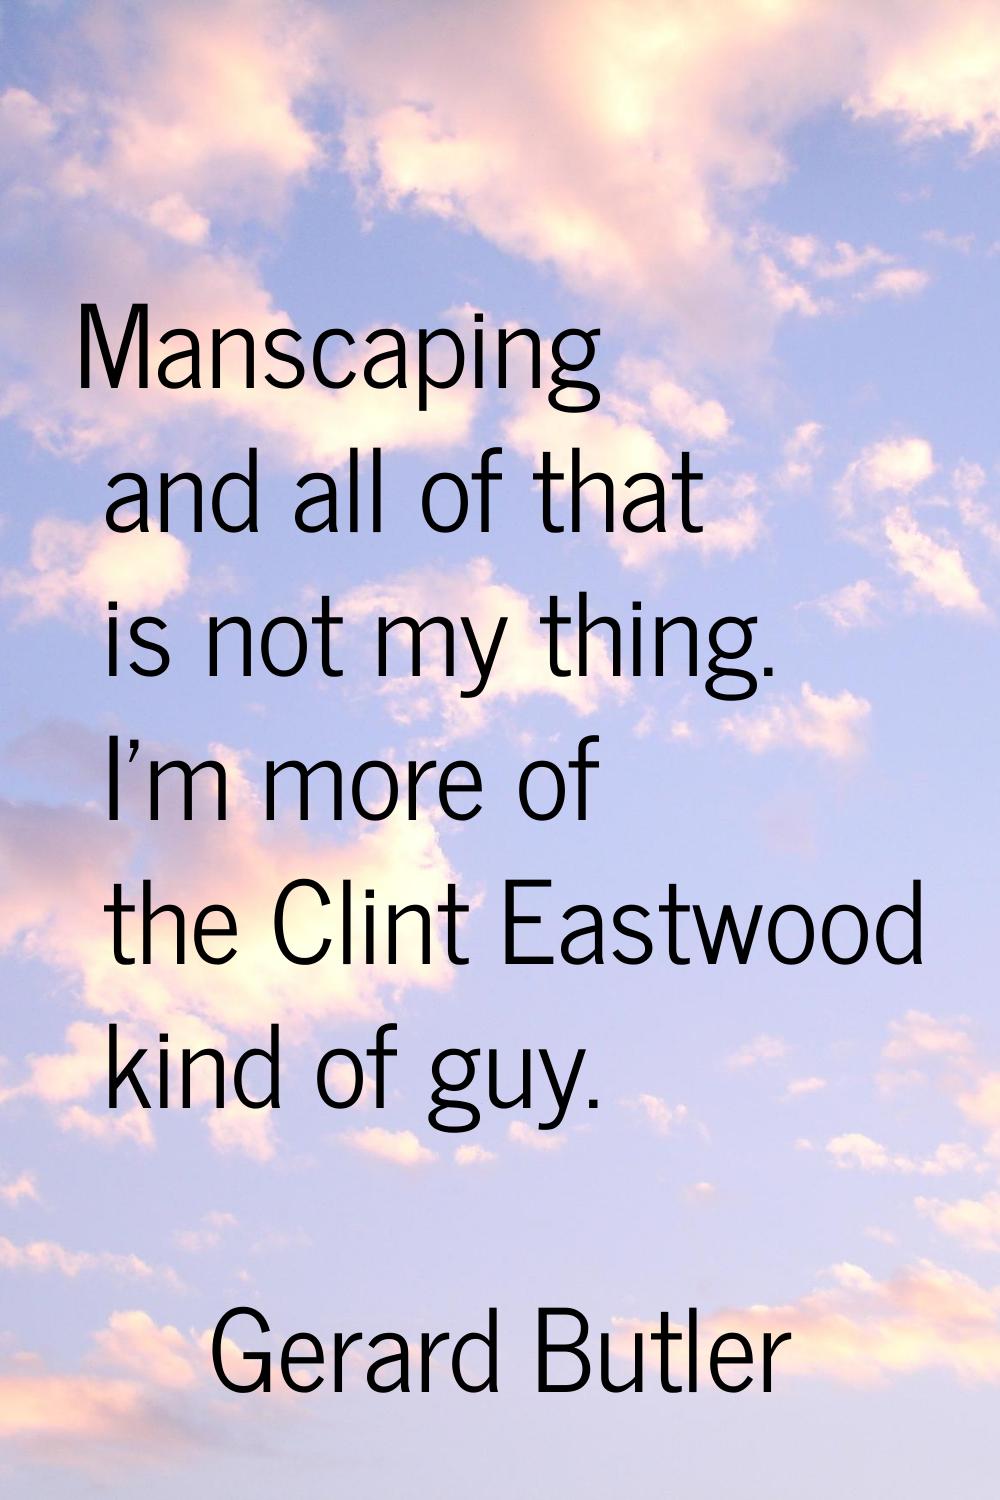 Manscaping and all of that is not my thing. I'm more of the Clint Eastwood kind of guy.